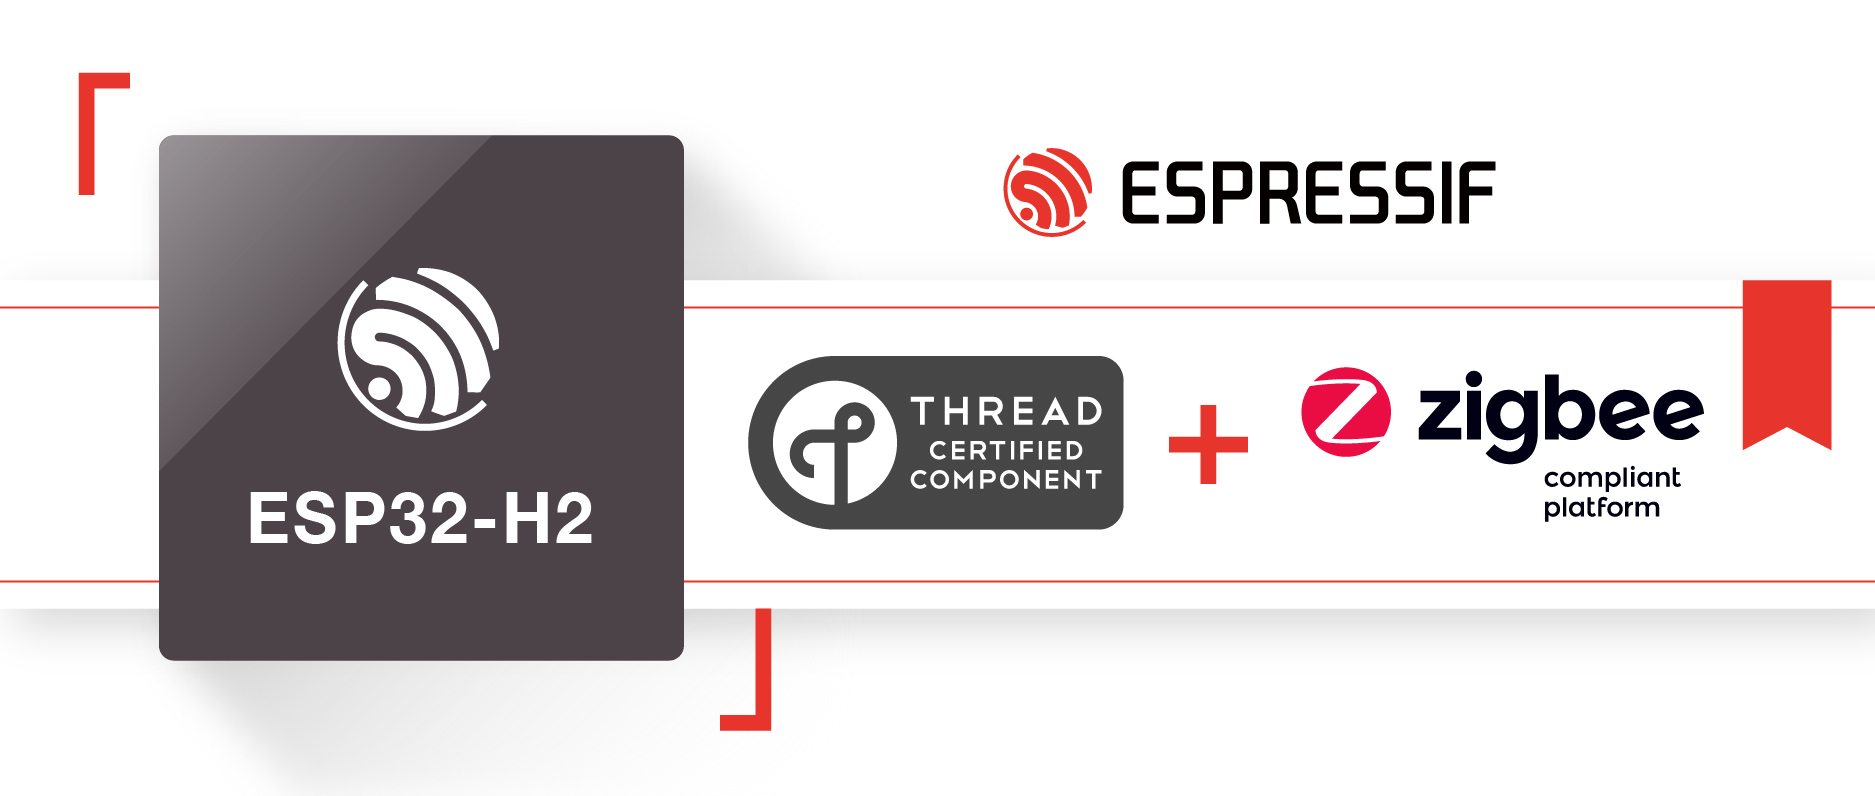 ESP32-H2 Officially Recognized as a “Thread-Certified Component” and a  “Zigbee-Compliant Platform”